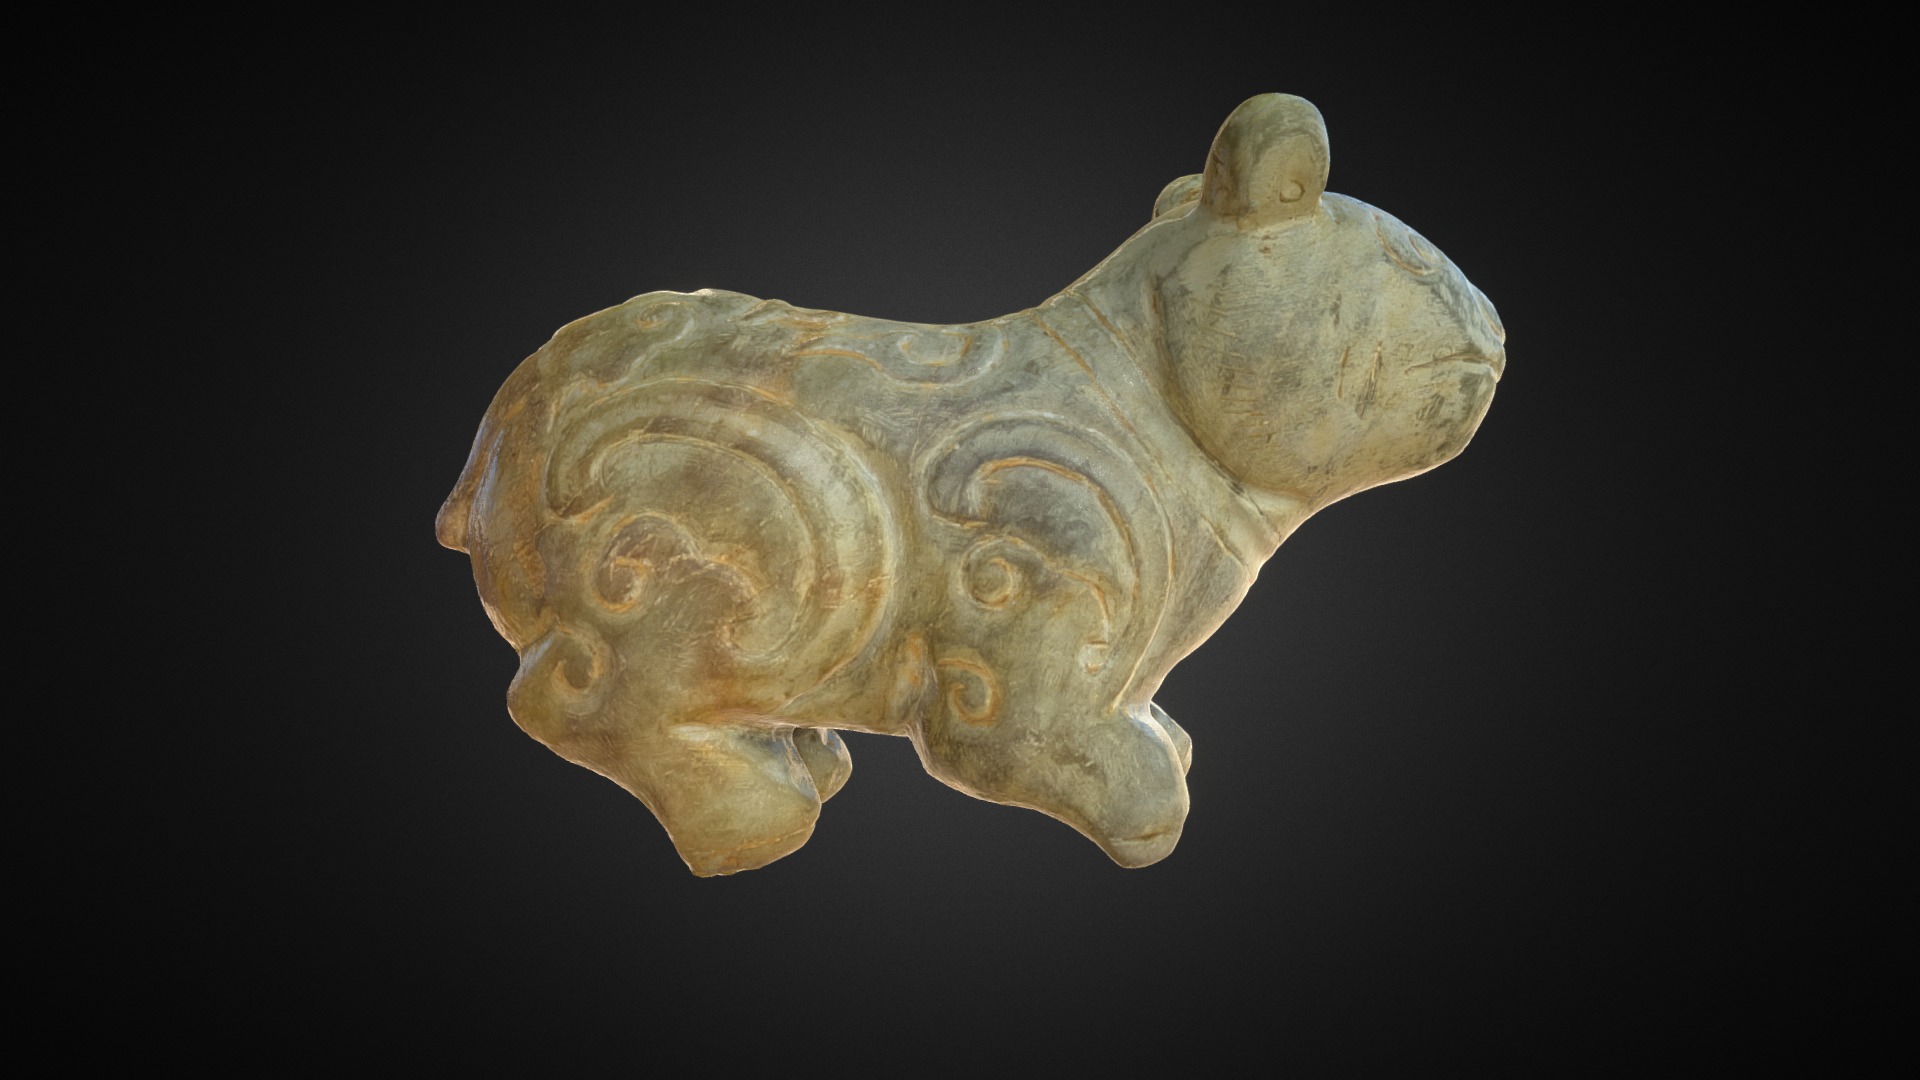 3D model Old Jade Handmade Mouse 老玉圓雕鼠 - This is a 3D model of the Old Jade Handmade Mouse 老玉圓雕鼠. The 3D model is about a skull of an animal.